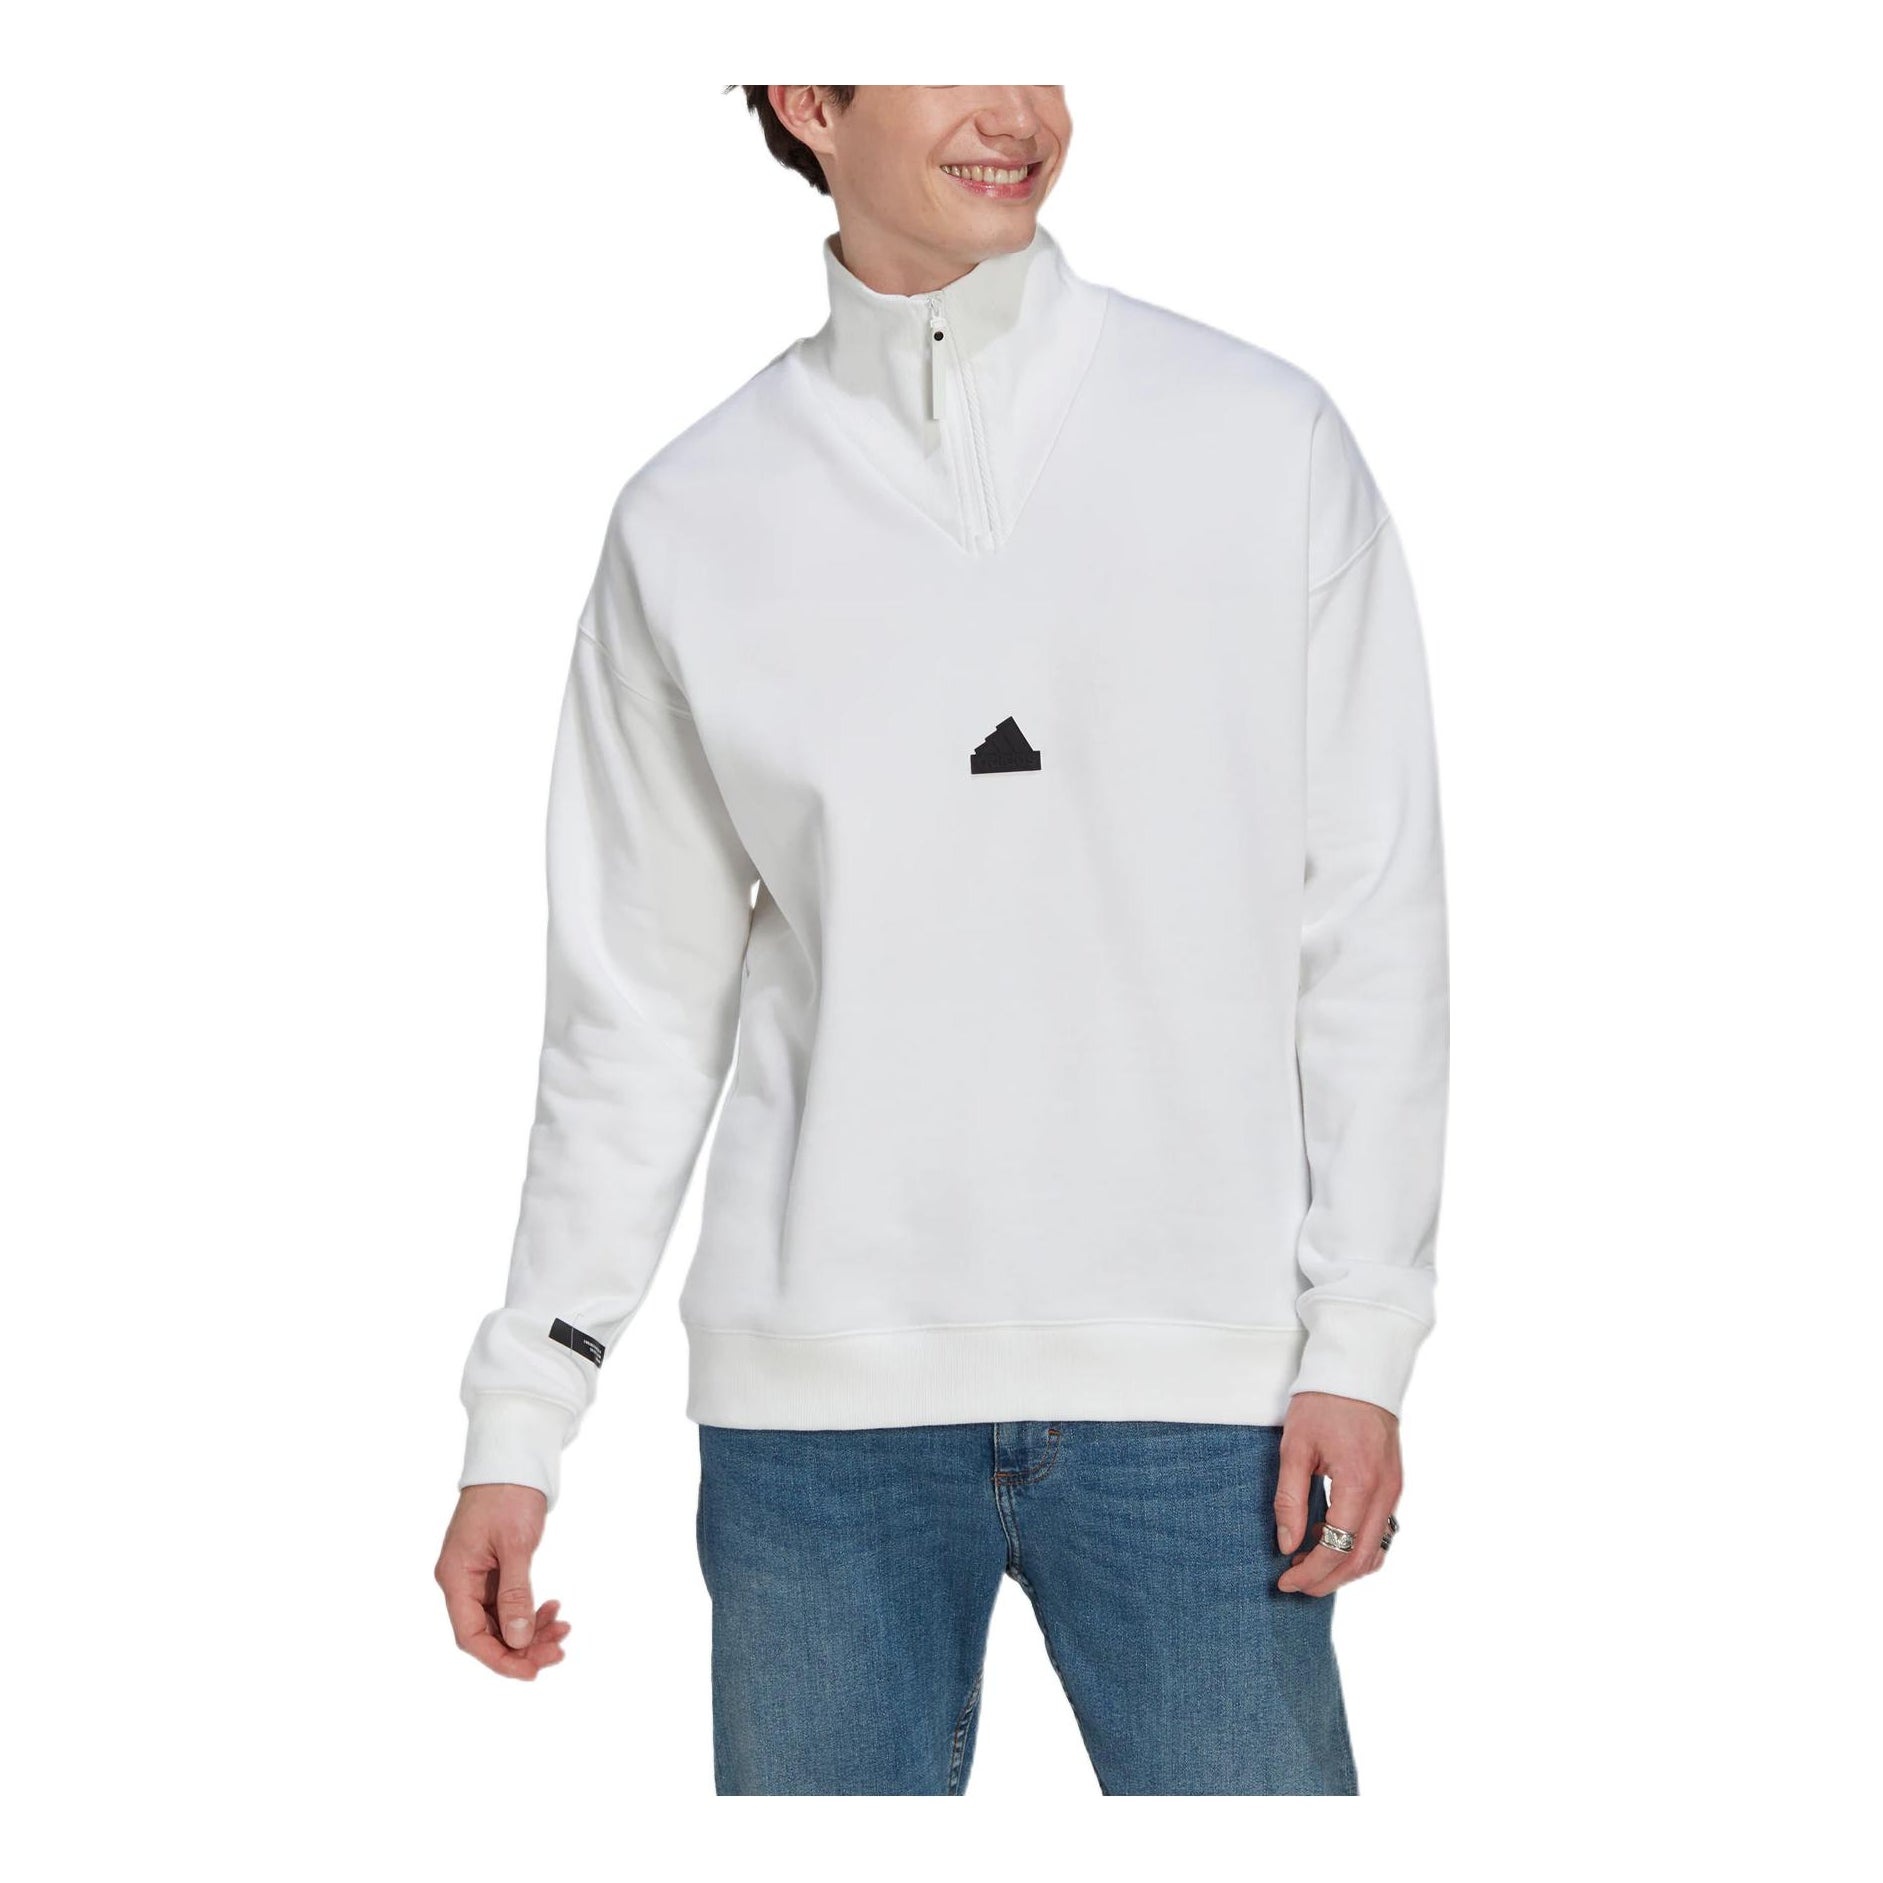 Men's adidas New 1/2-zip Solid Color Small Logo Half Zipper Pullover Stand Collar Long Sleeves White - 1